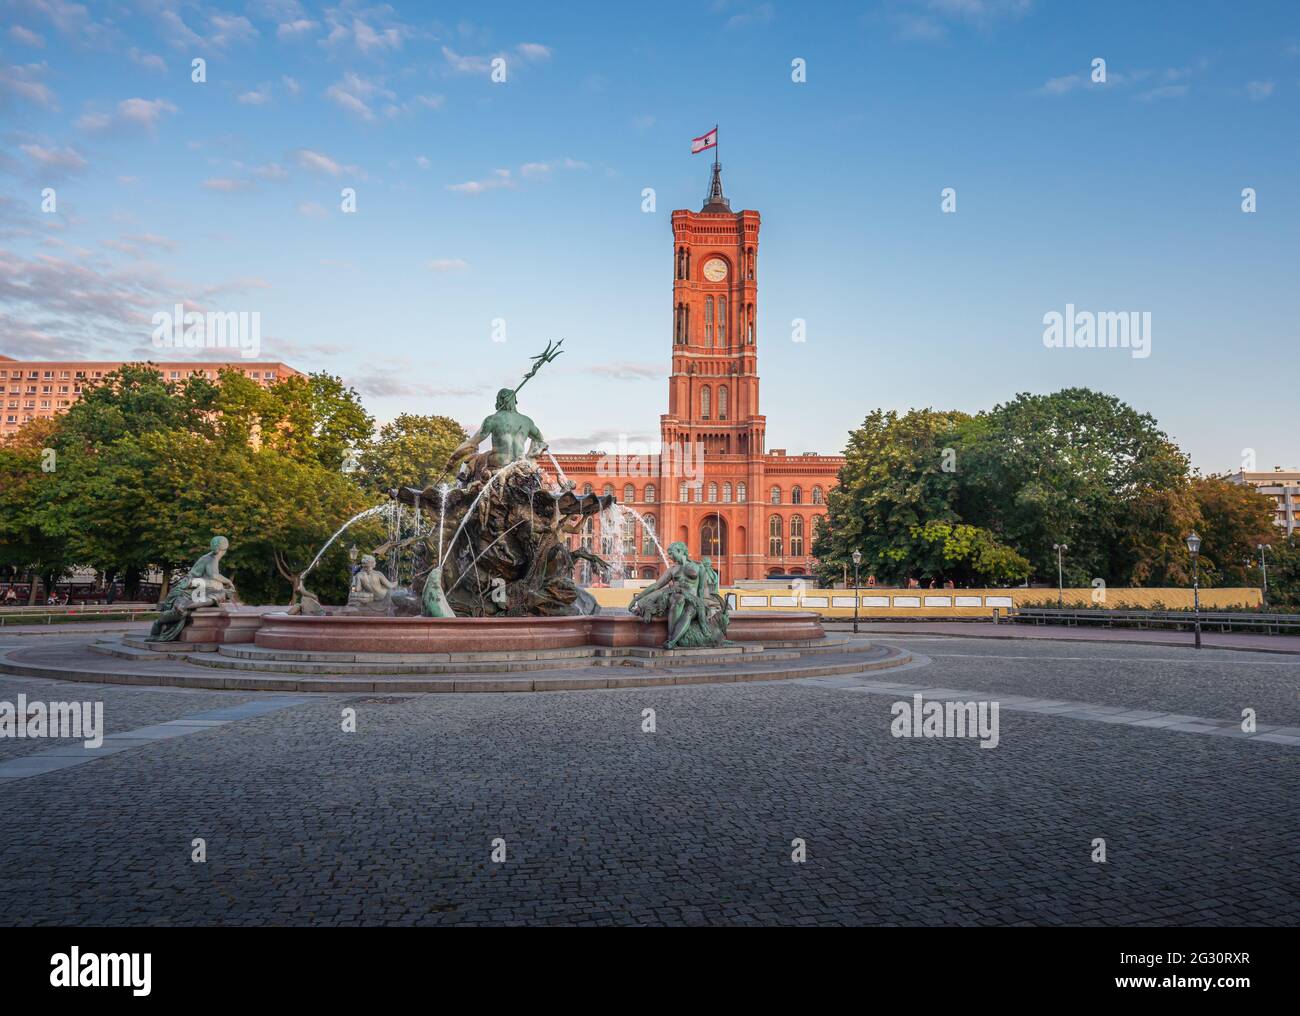 Berlin Town Hall (Rotes Rathaus) and Neptune Fountain (Neptunbrunnen) - Berlin, Germany Stock Photo